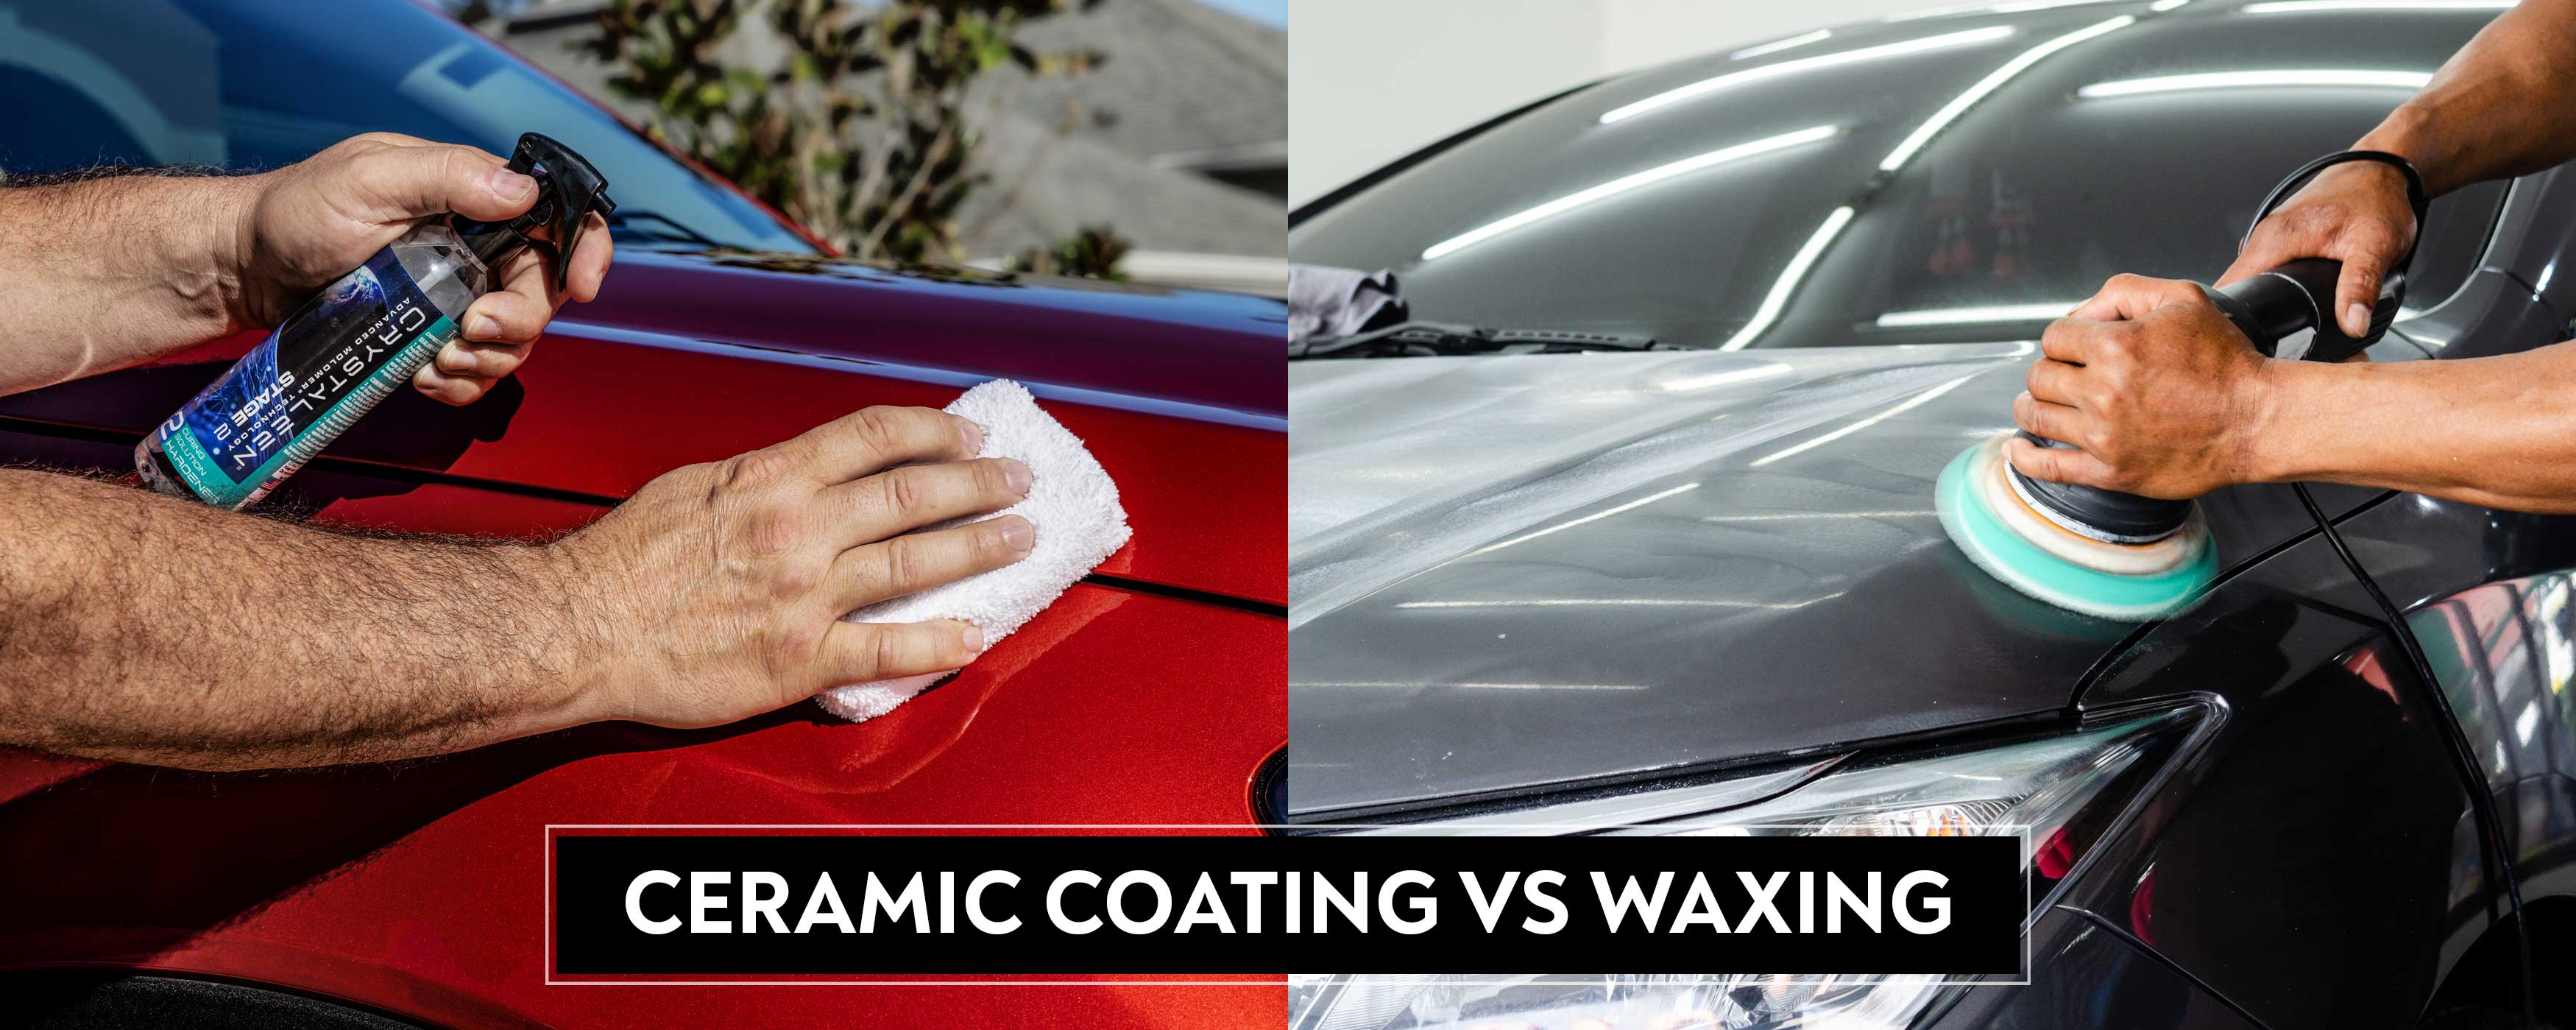 Ceramic Coating vs. Waxing Your Car - What is The Difference in Ceramic Coating and Wax and Which Is the Best?